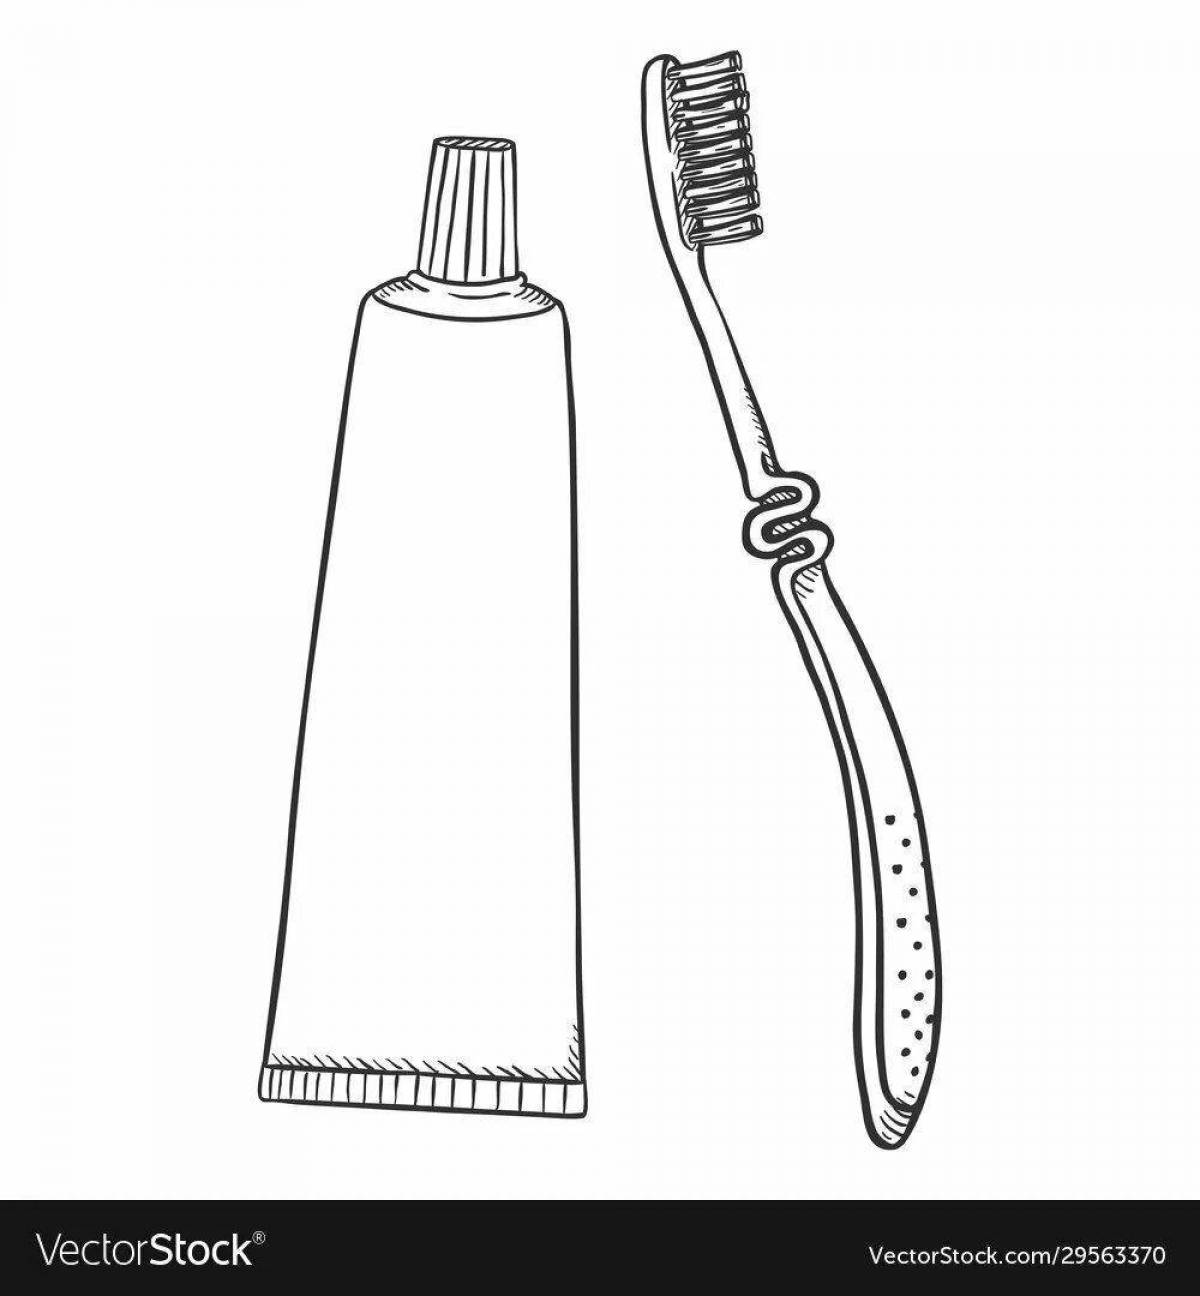 Children's toothbrush and paste #11